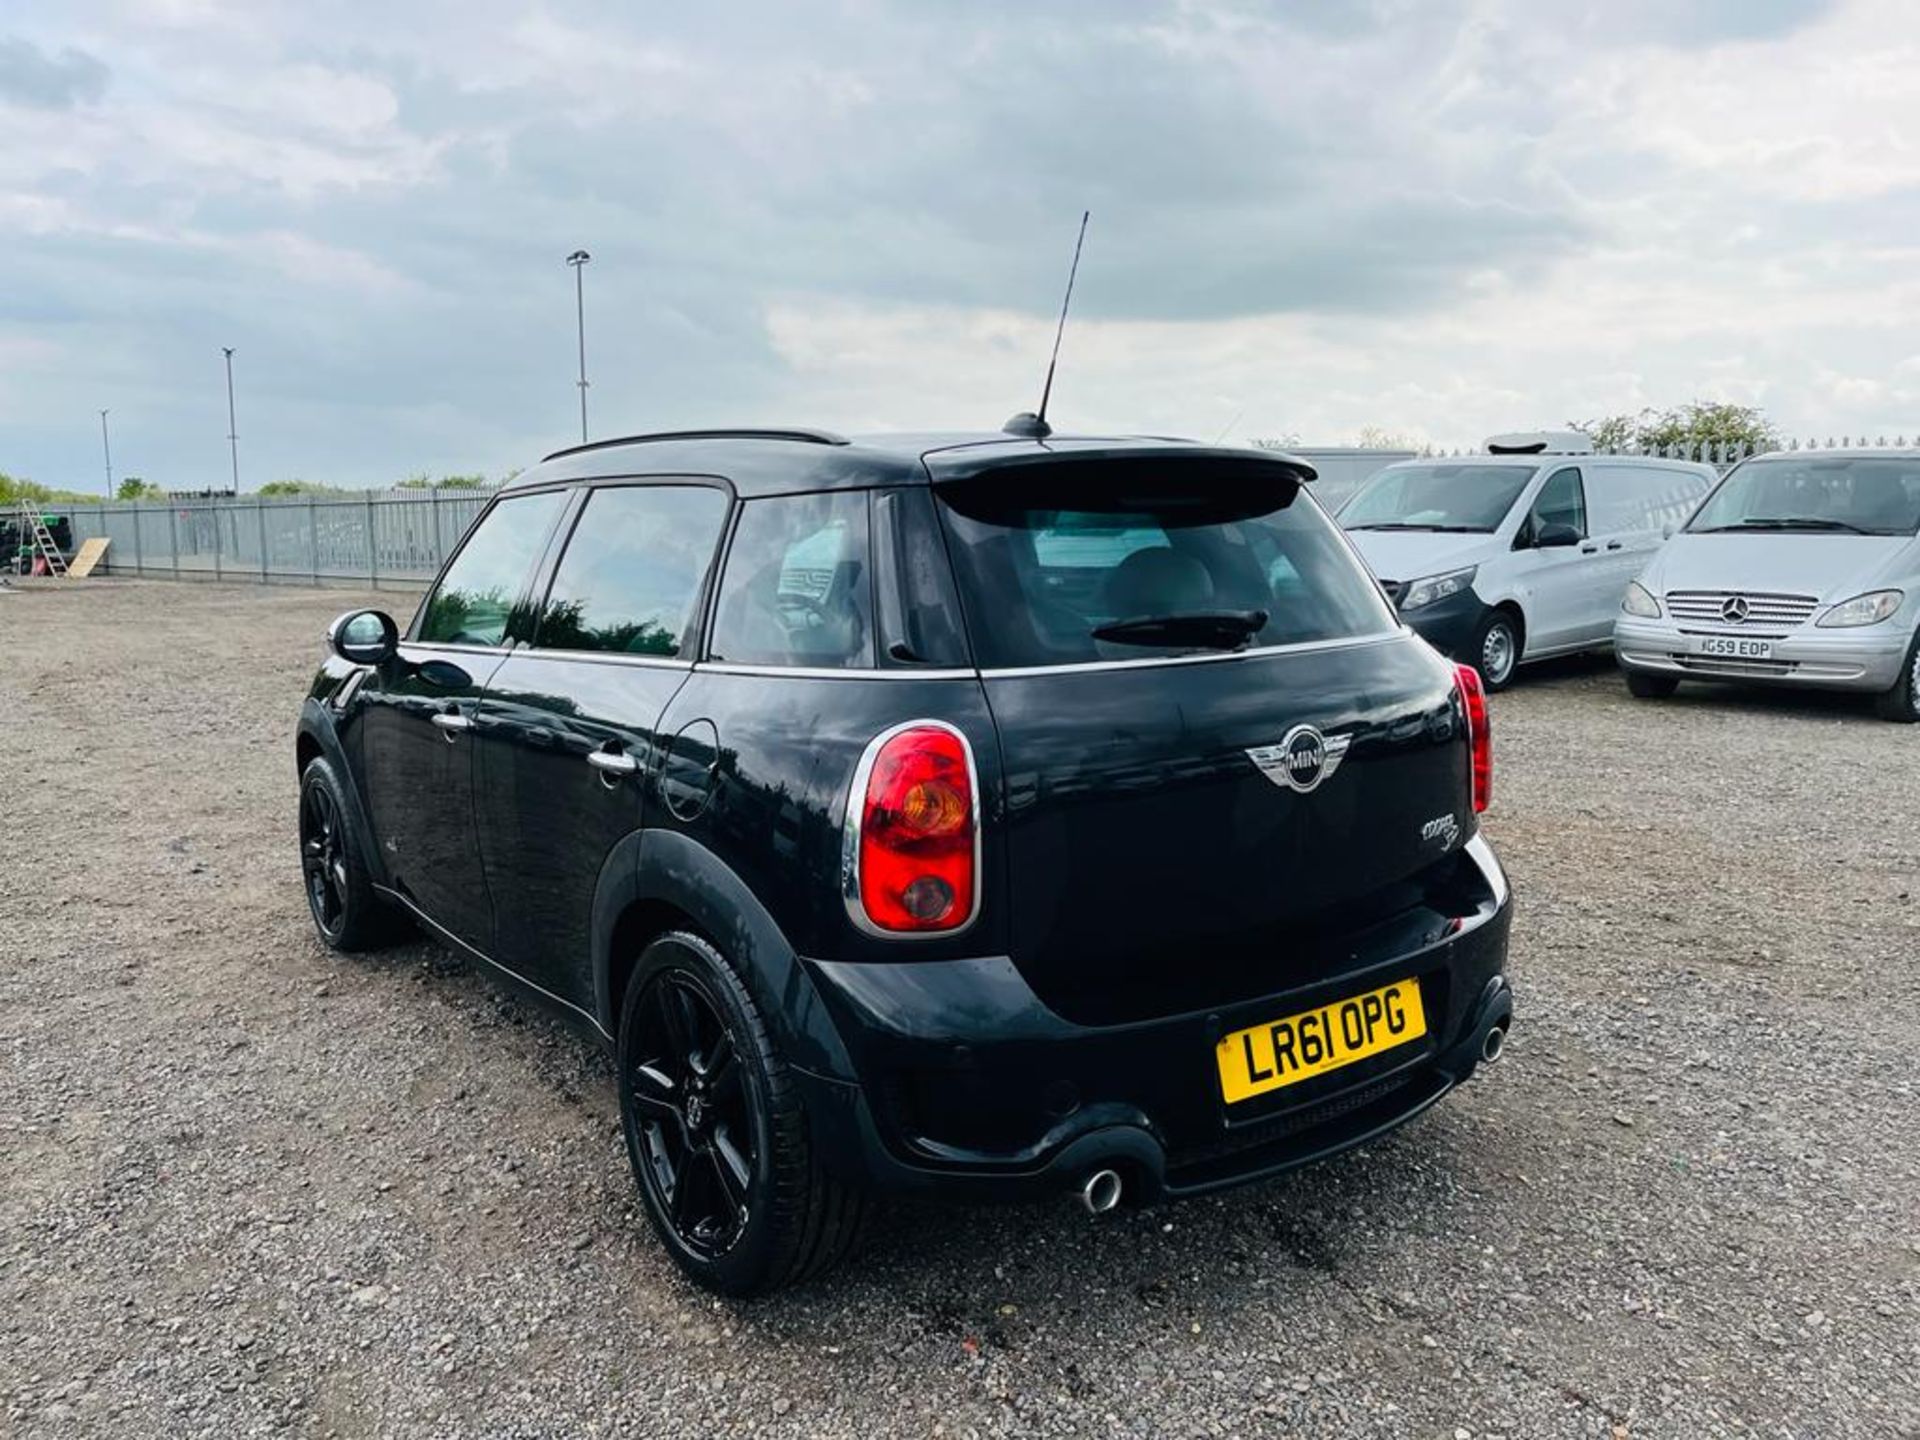 **ON SALE** Mini Cooper Countryman All4 SD 2.0 2011 "61 Reg" - Start/Stop - Alloy Wheels -Navigation - Image 5 of 25